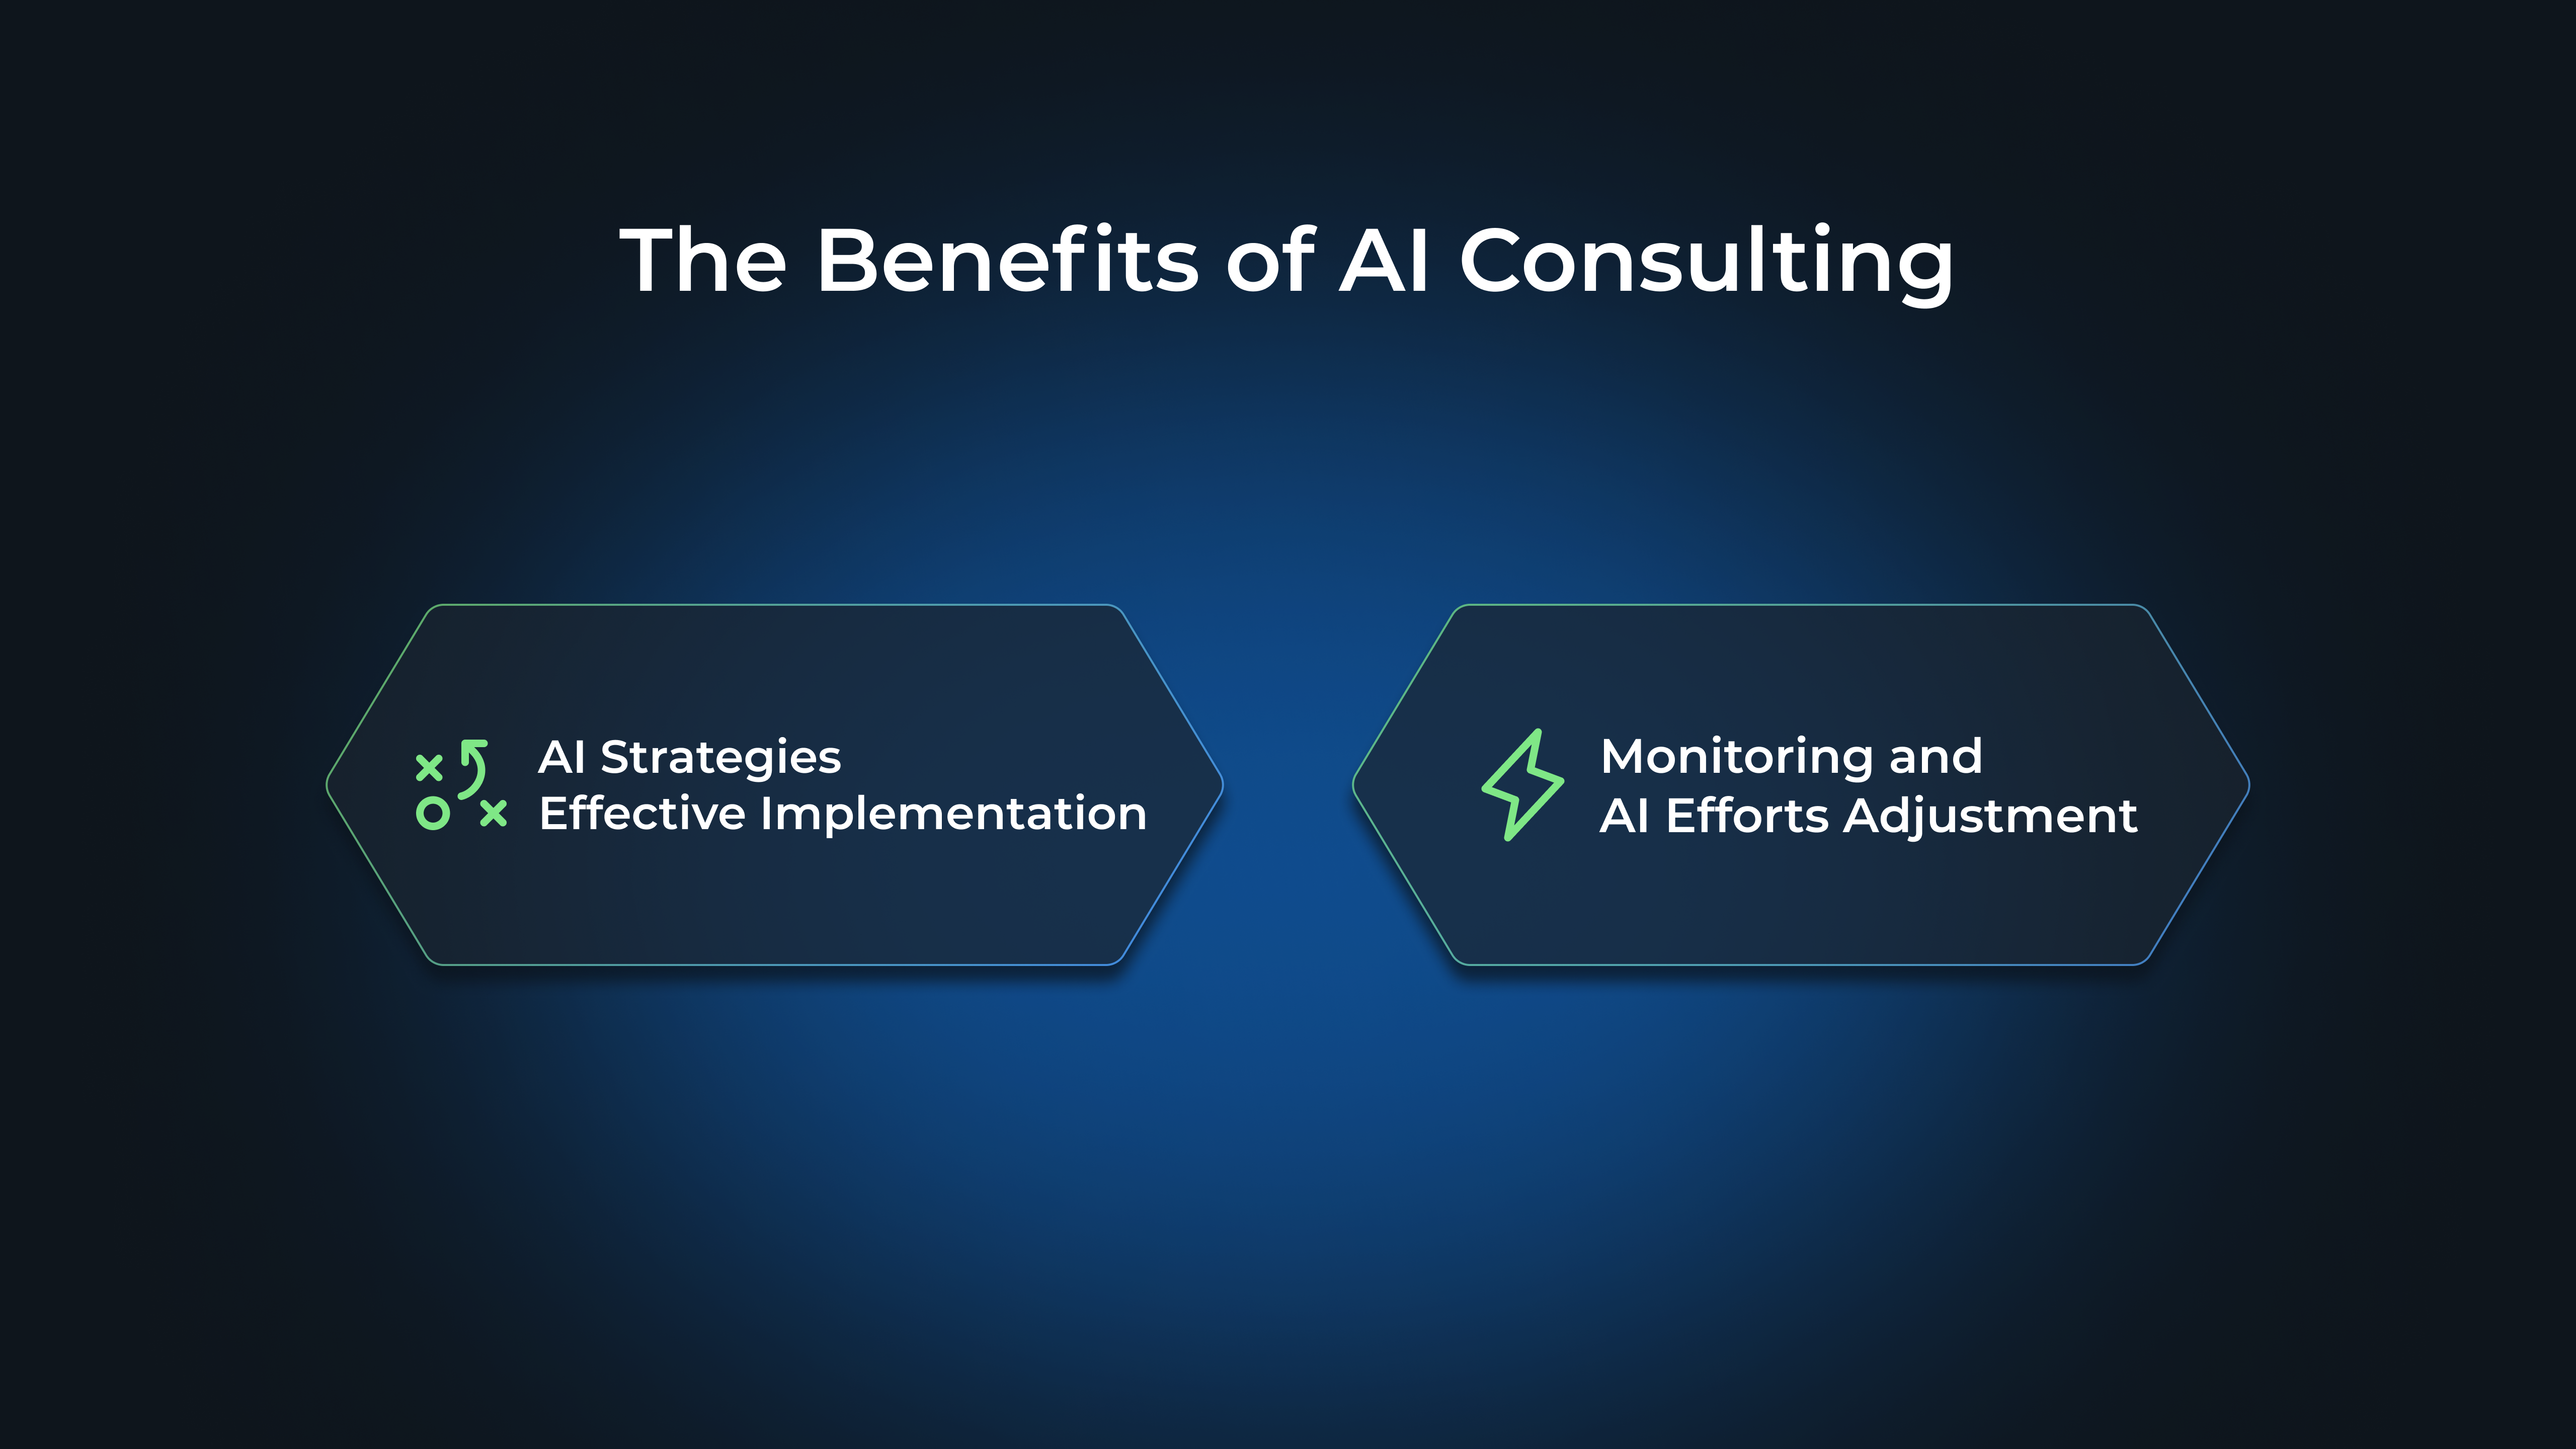 The Benefits of AI Consulting: AI Strategies Effective Implementation, Monitoring and AI, Efforts Adjustment
